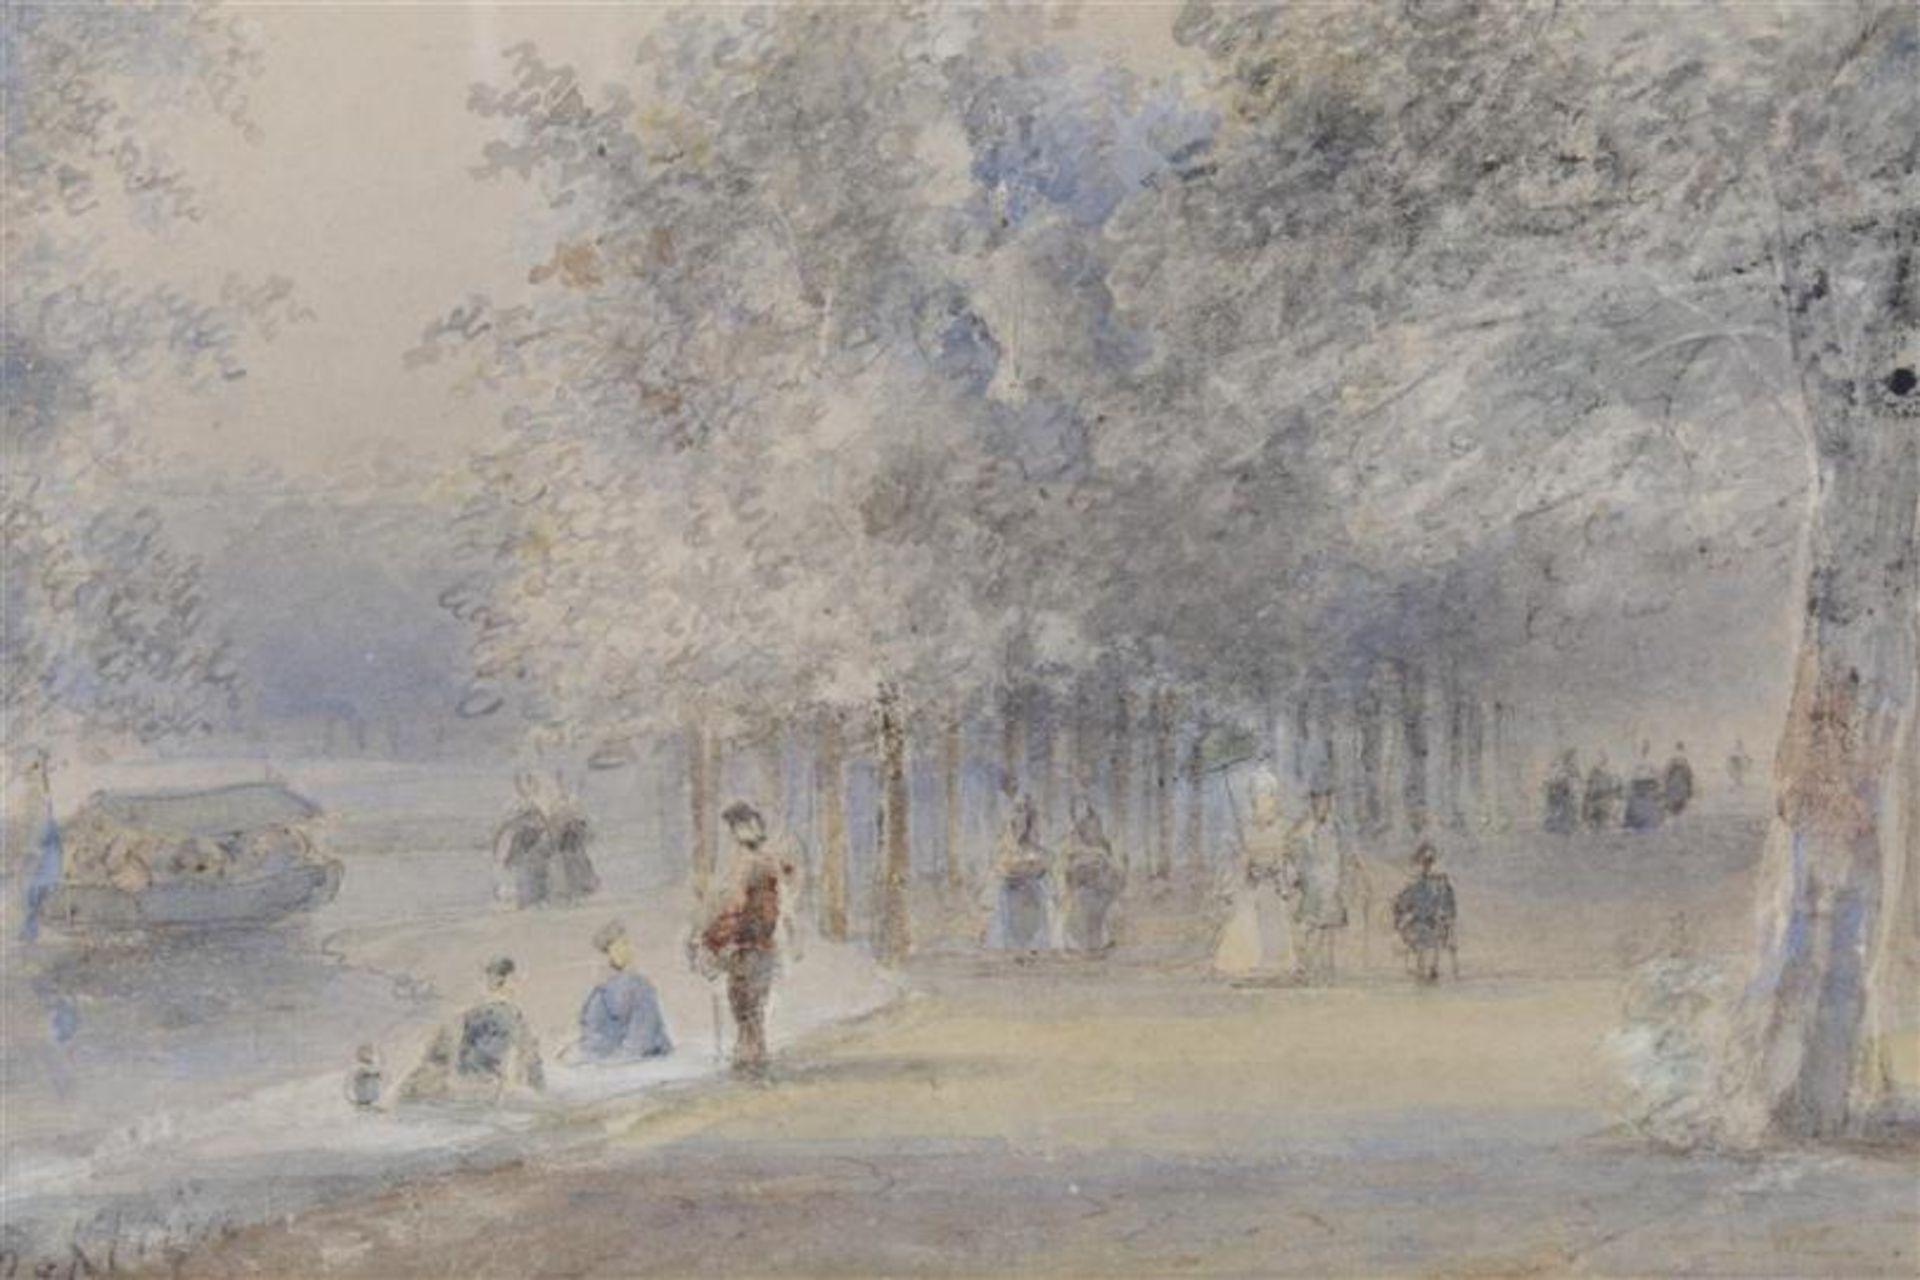 Bottom left remains of signature, cityscape with figures on a river under a tree, watercolor 16x20 - Bild 3 aus 3